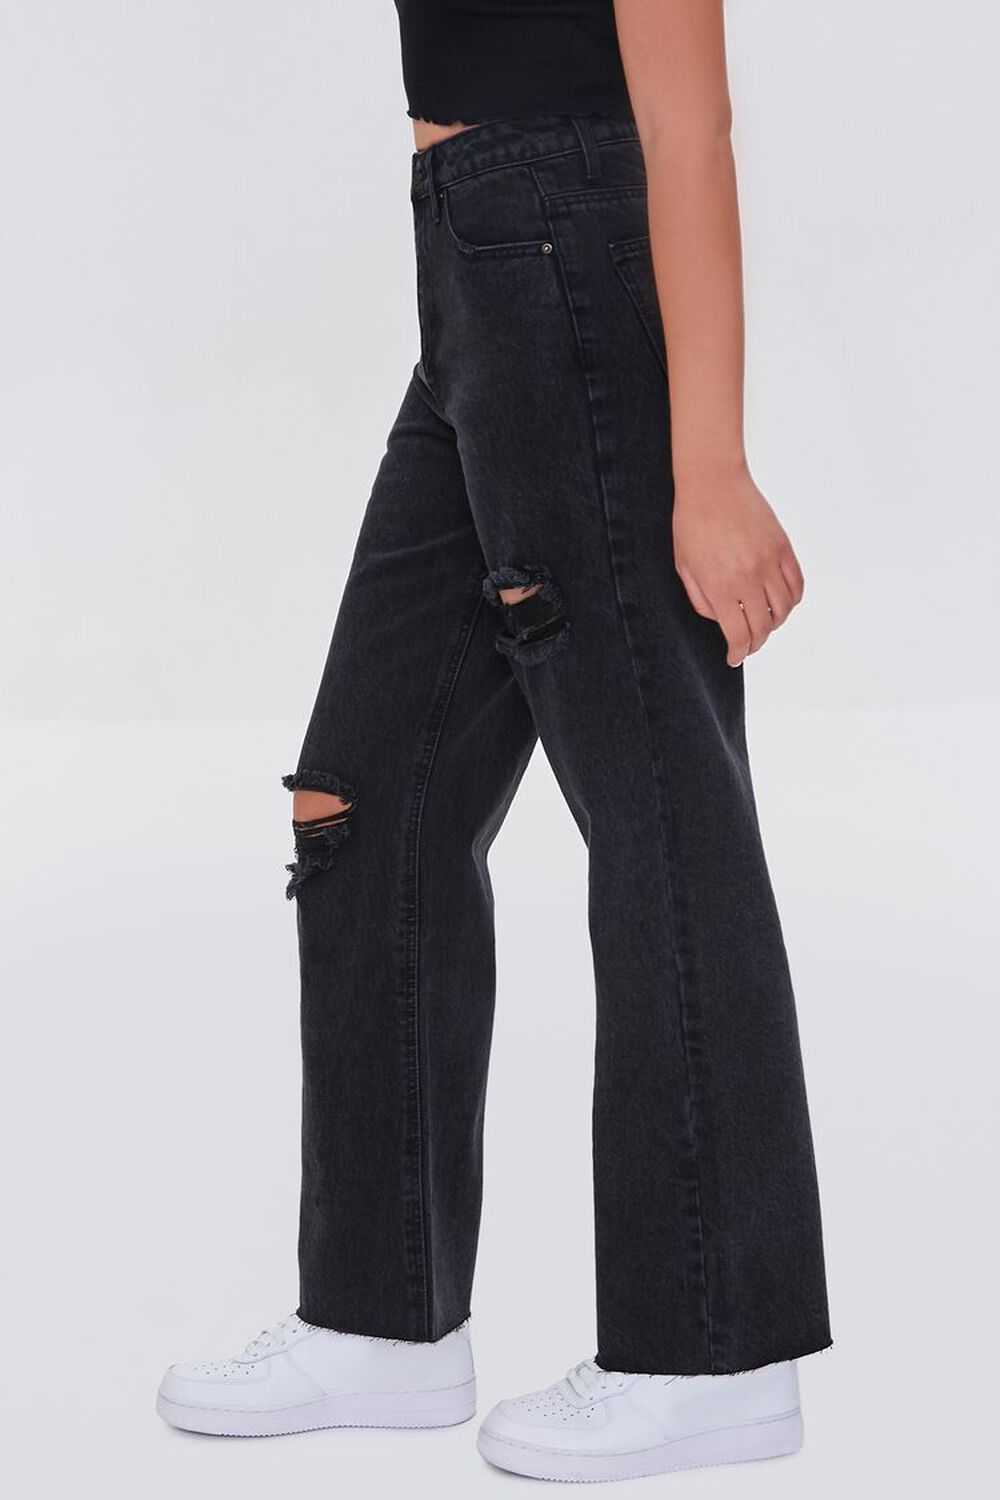 Dr Denim Macy Flare Jeans With Ripped Knees In Black, 49% OFF